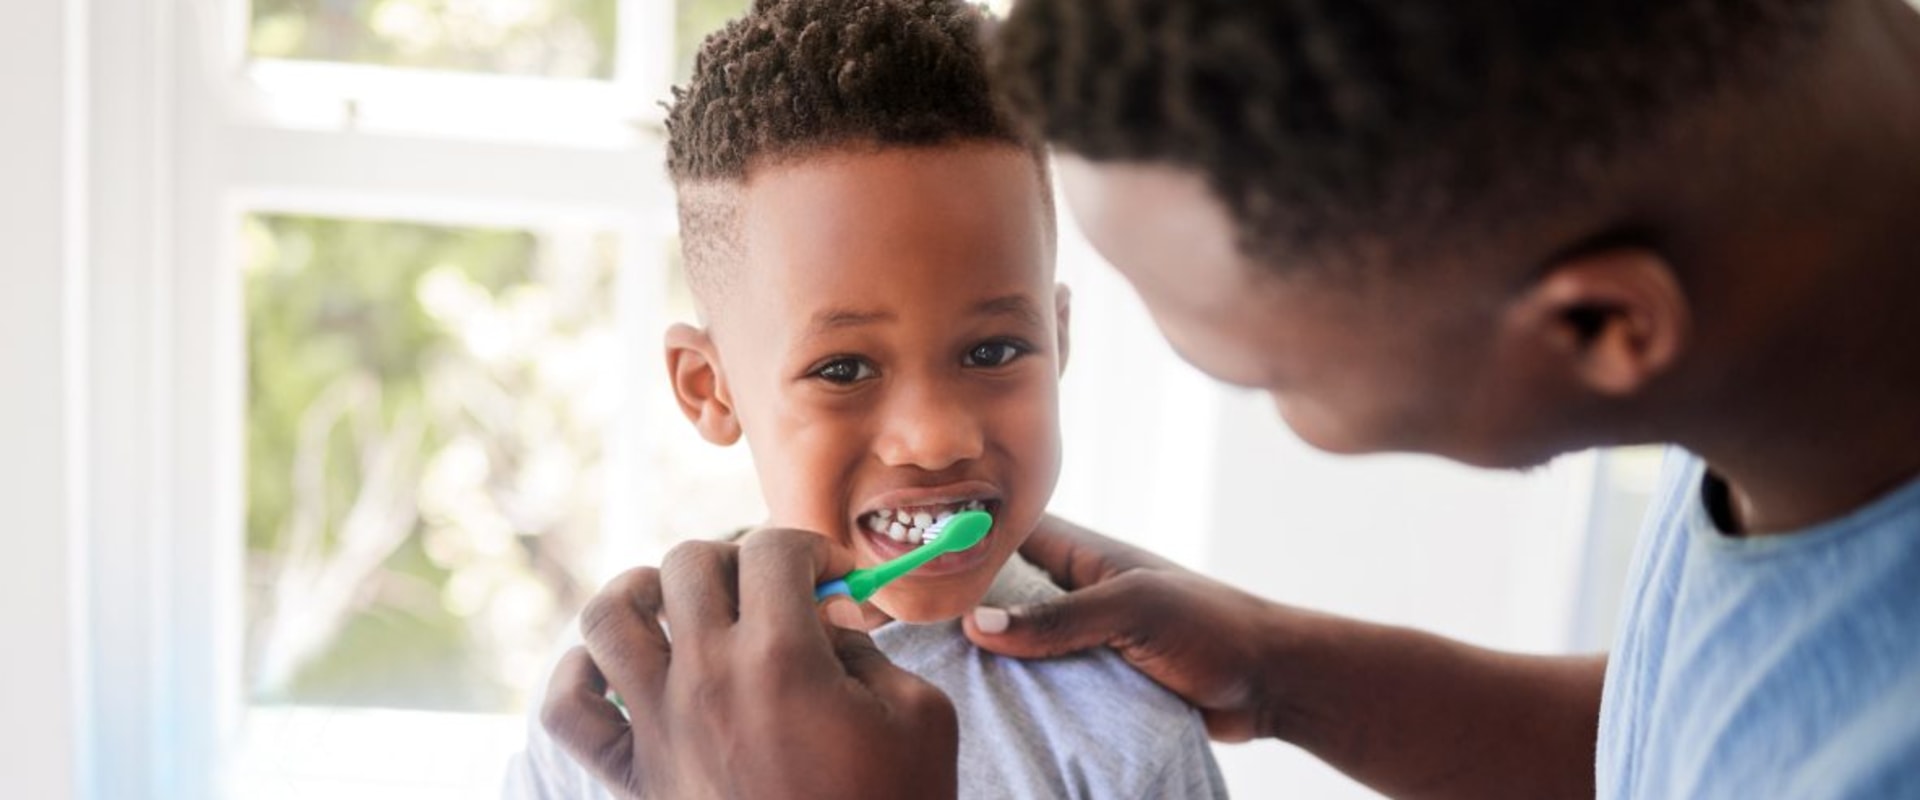 Why Is Children's Dentistry Important for Early Oral Health?